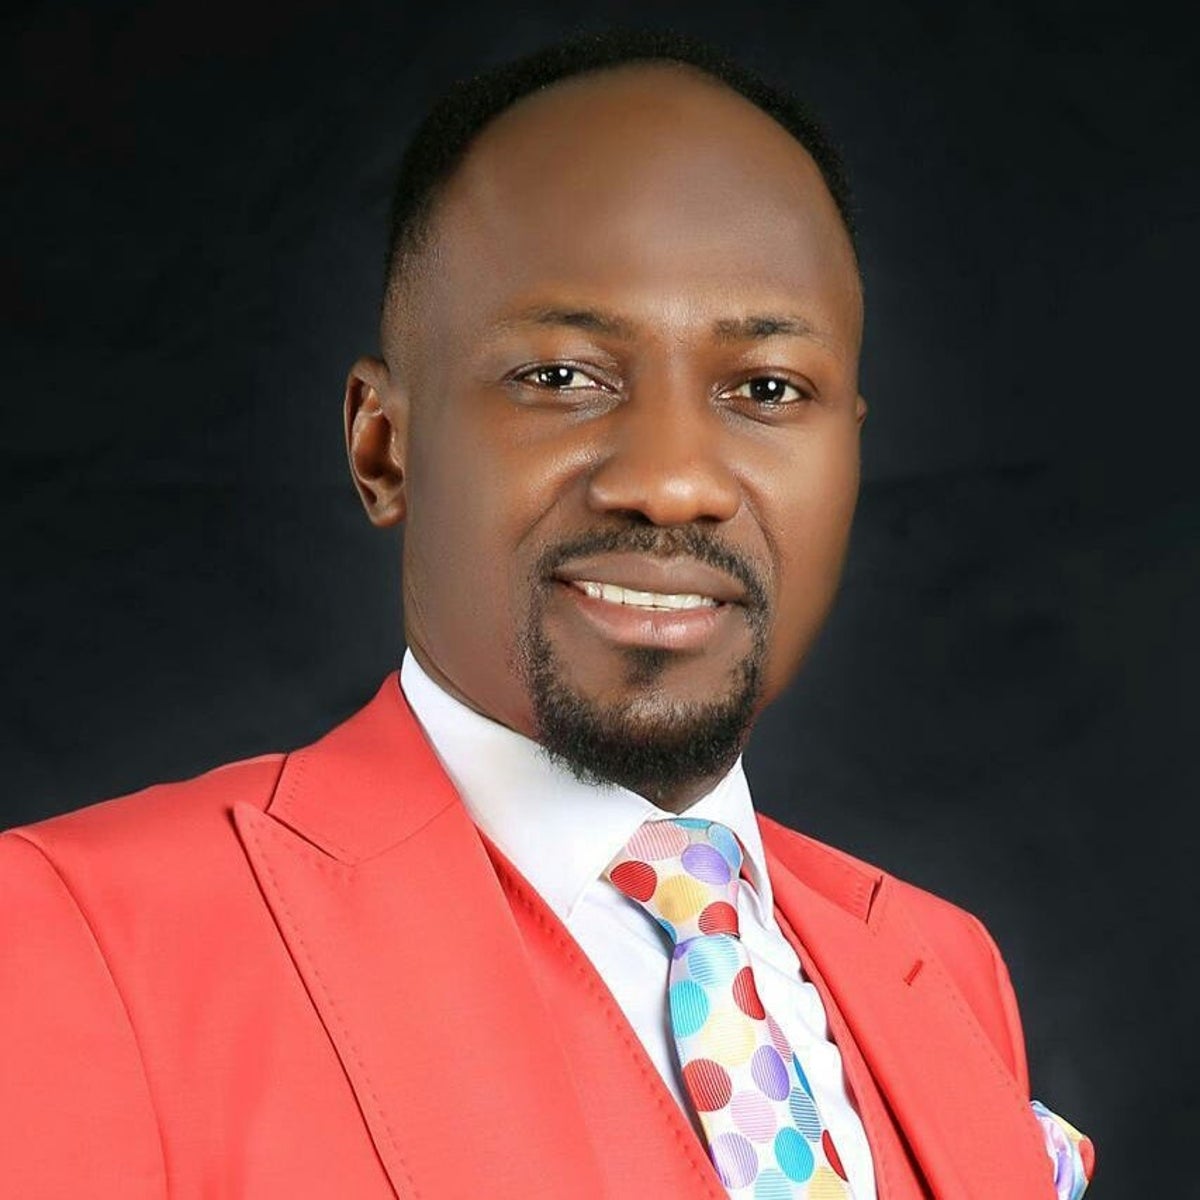 Apostle Suleman reacts